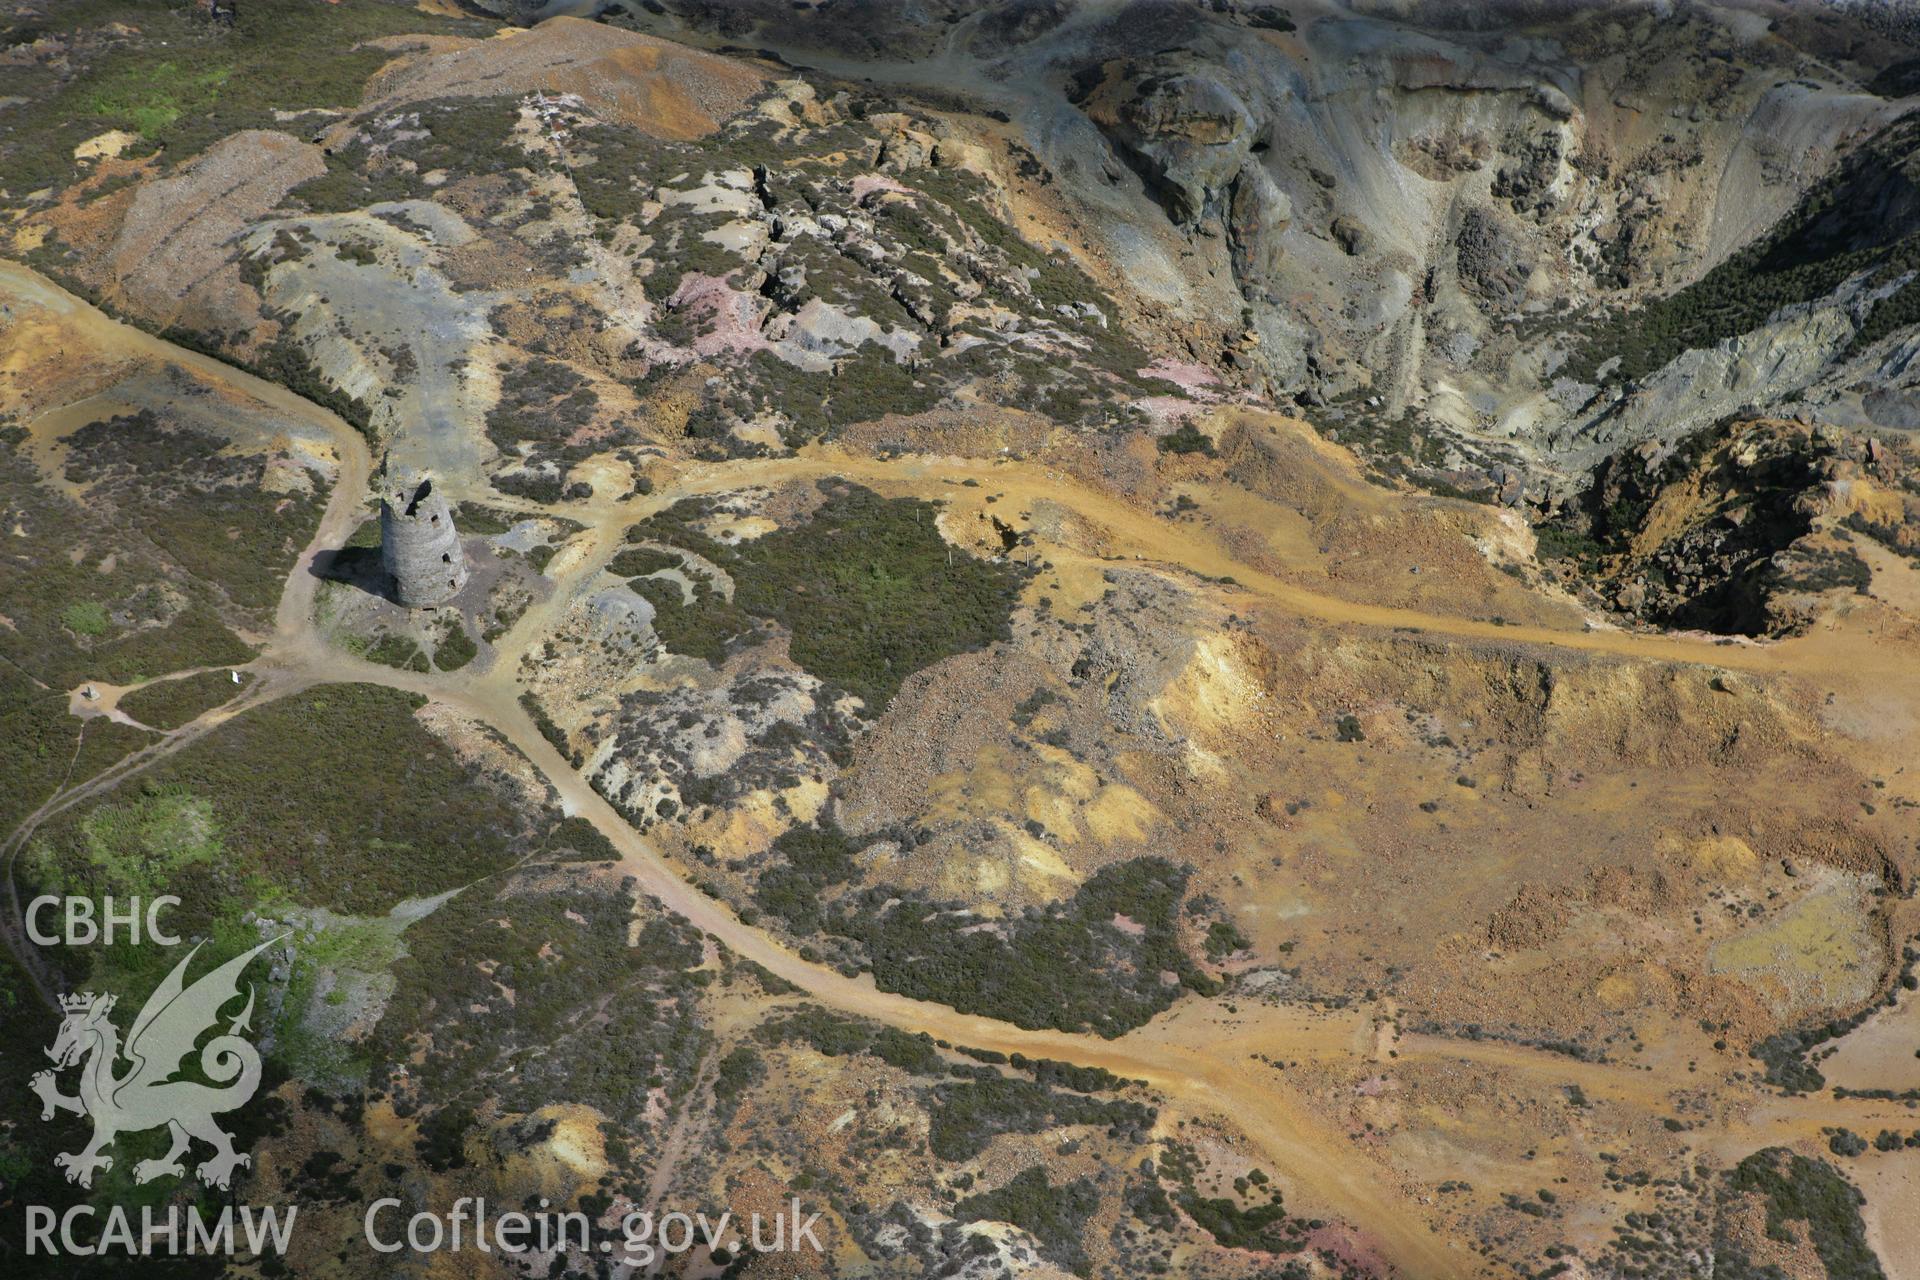 RCAHMW colour oblique photograph of Parys Mountain Copper Mines, Amlwch, view of pumping windmill. Taken by Toby Driver on 20/07/2011.